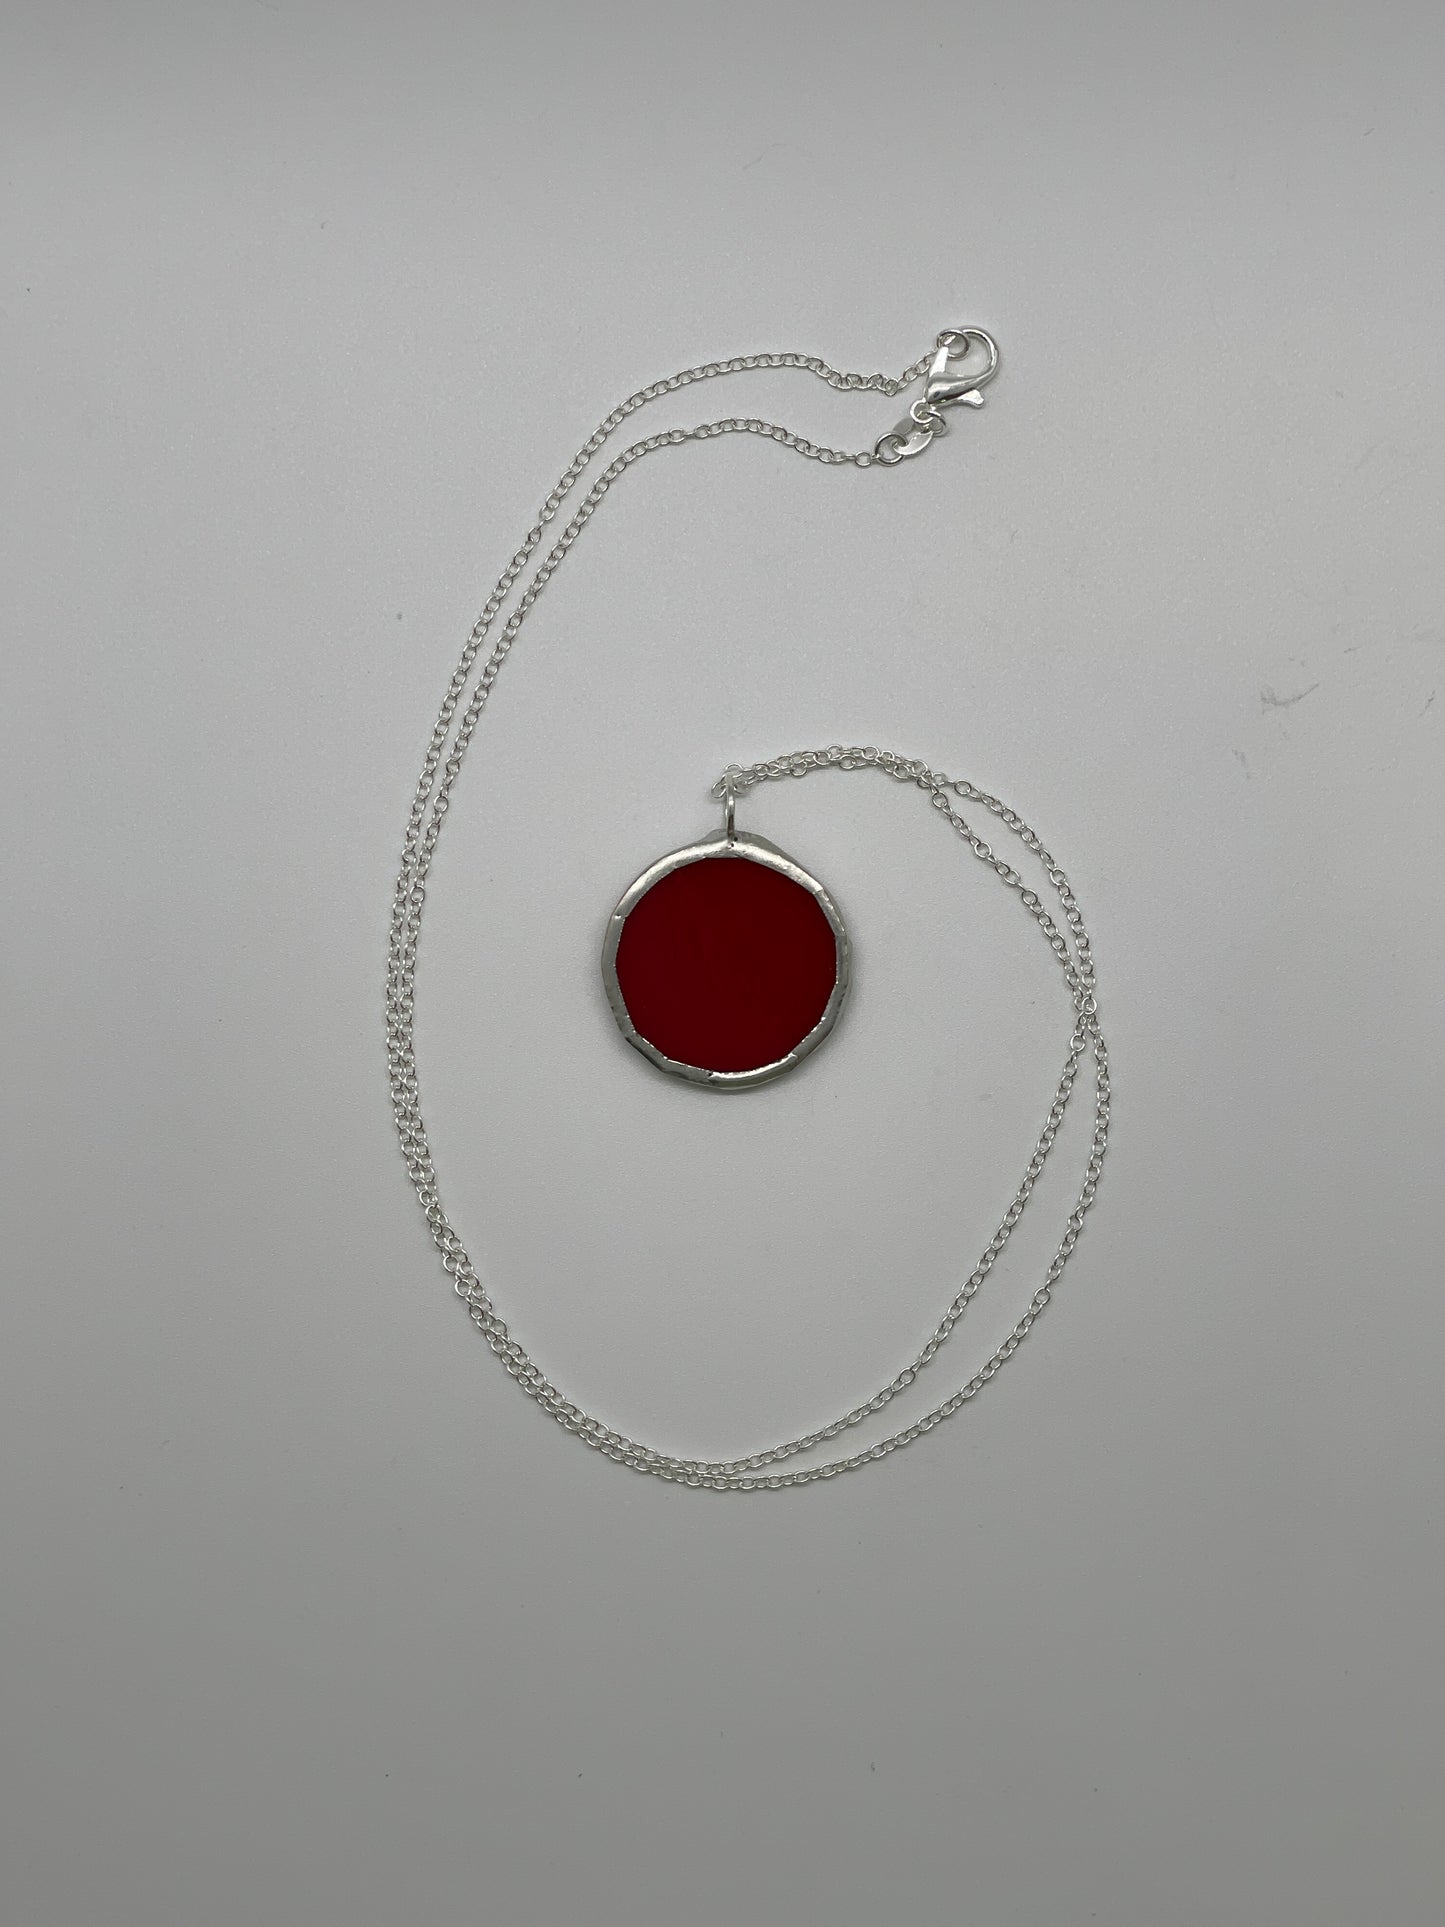 Stained Glass Necklace: 1” Circle, Opaque Red